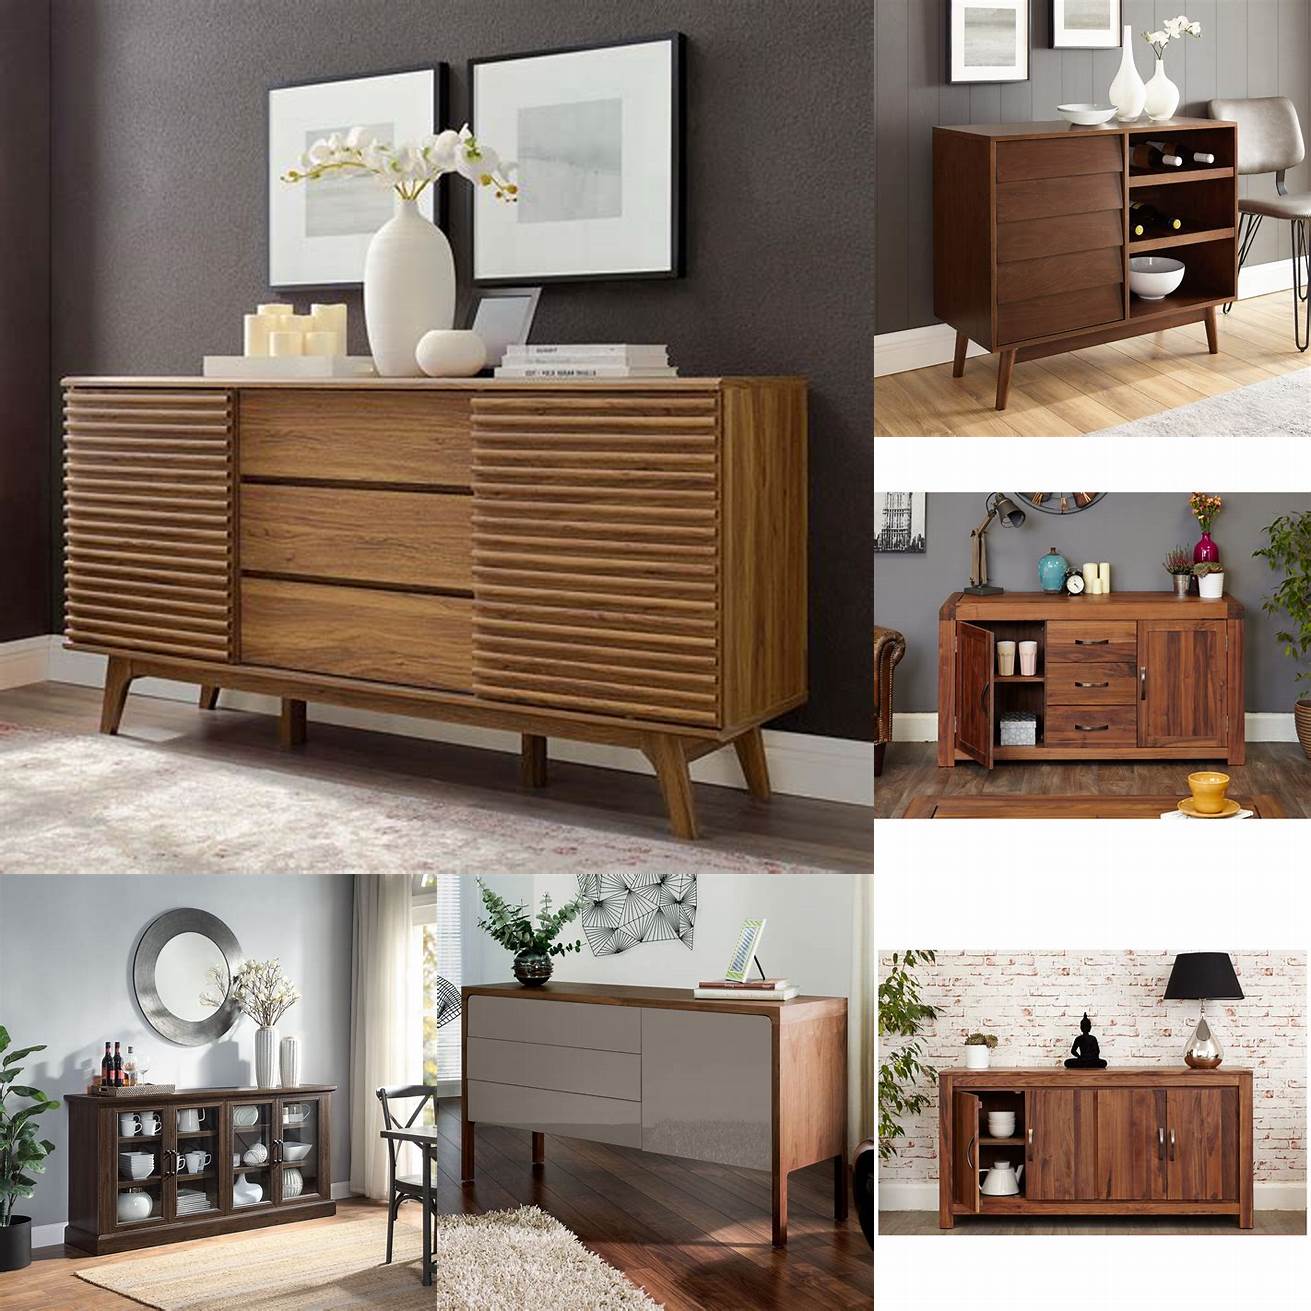 A walnut sideboard can provide both storage and style in your dining room or living room